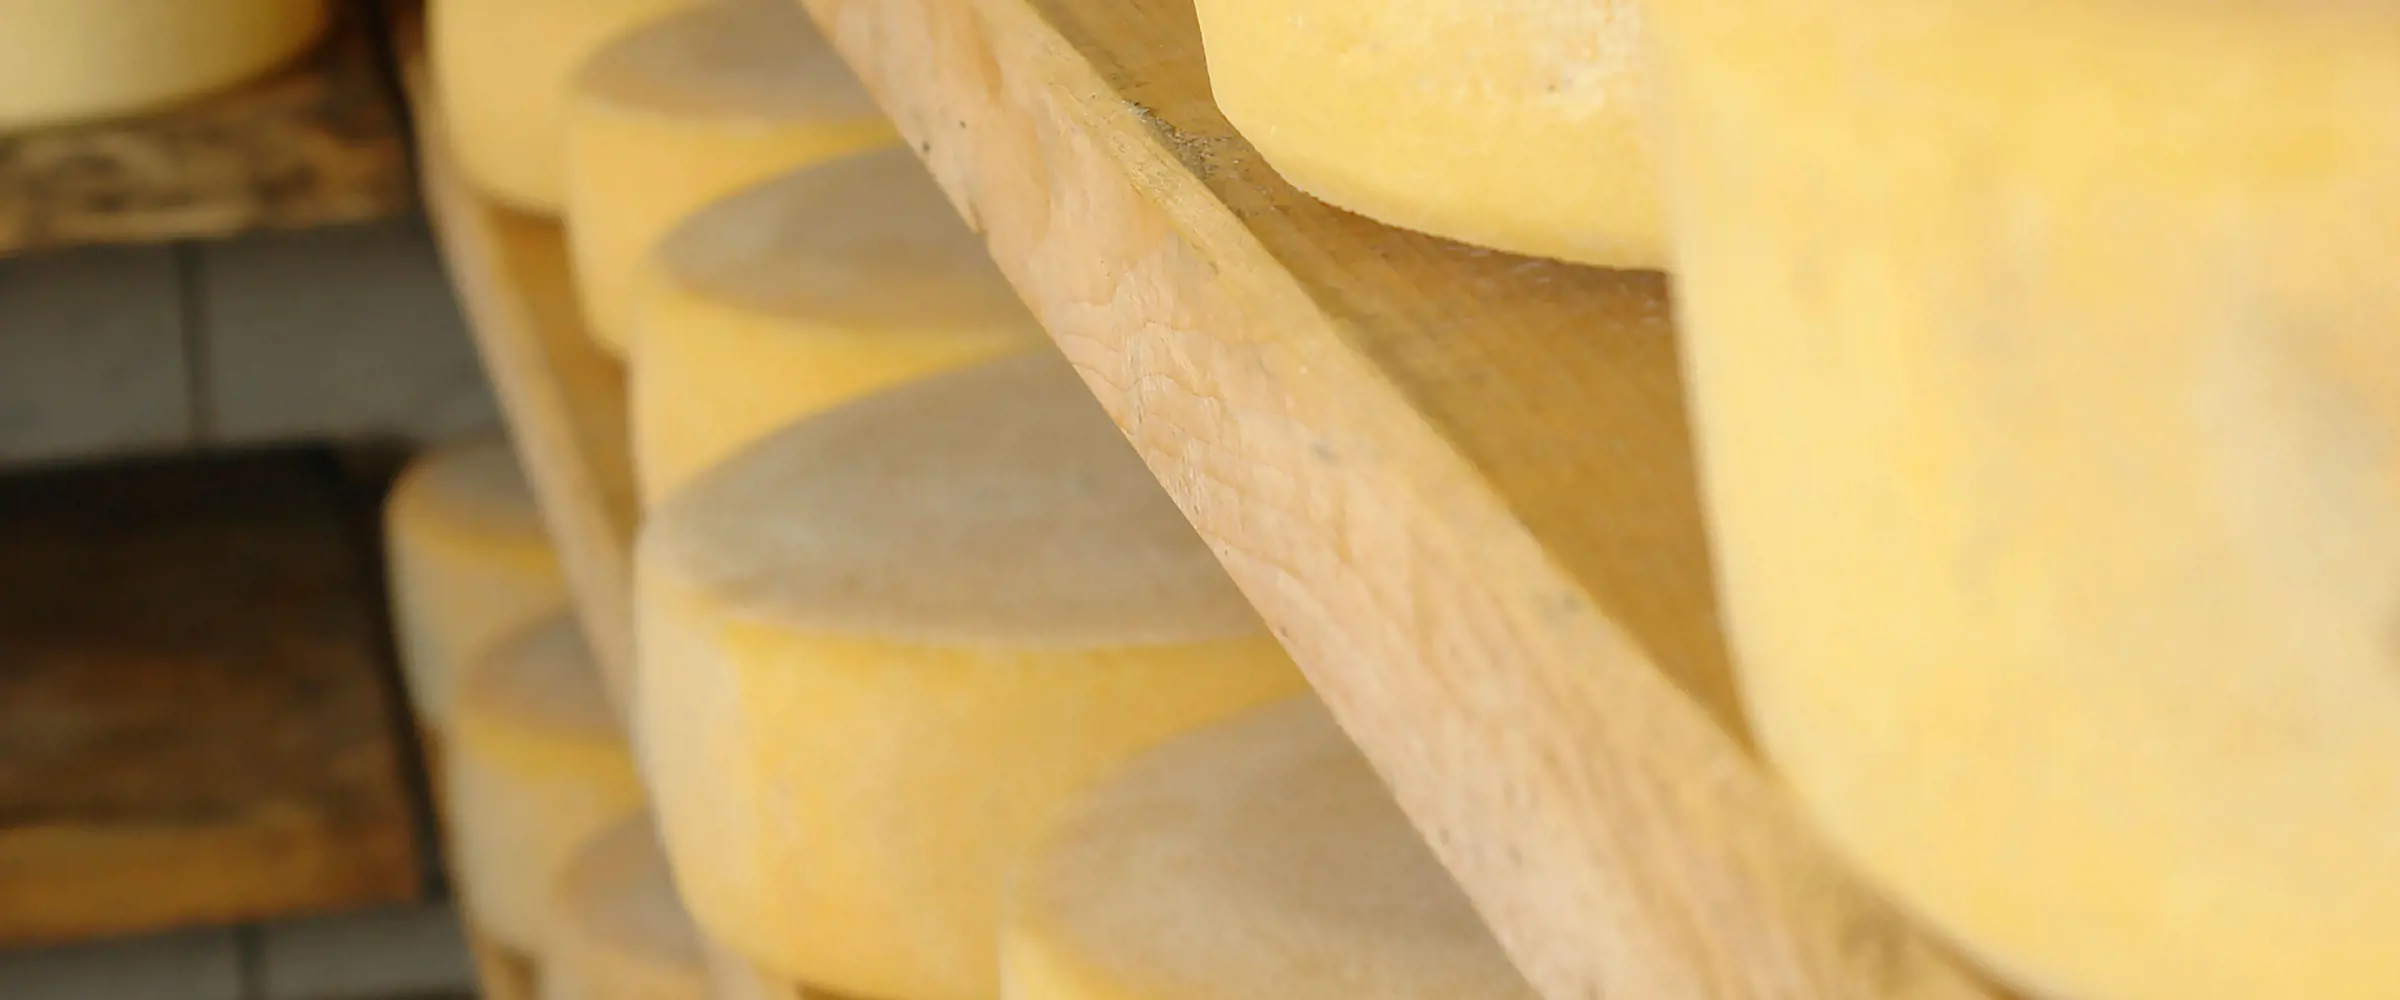 Great whey-based solutions for fat replacement in cheese